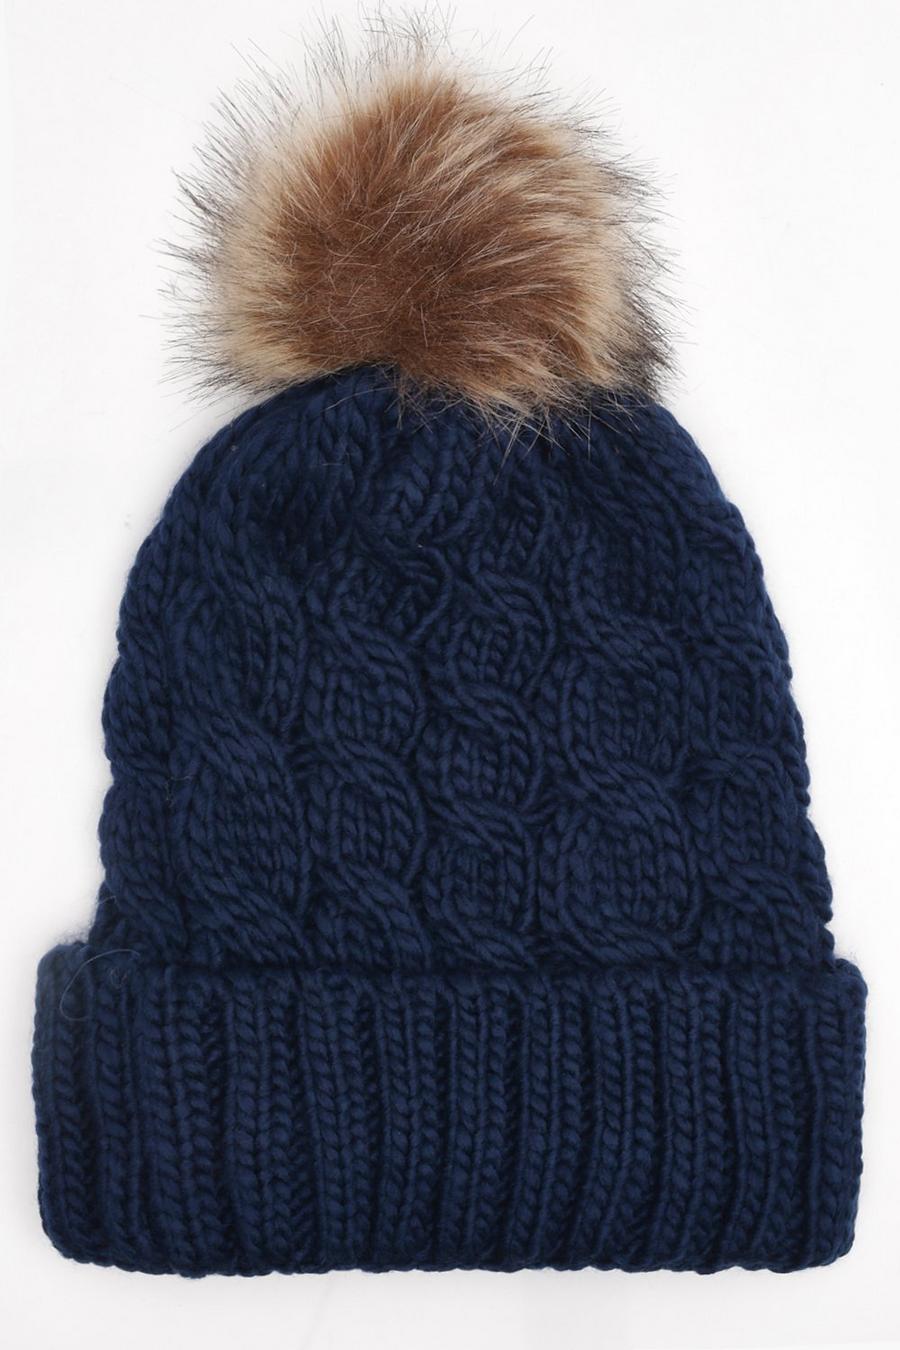 Ria Fleece Lined Cable Knit Beanie Hat image number 1